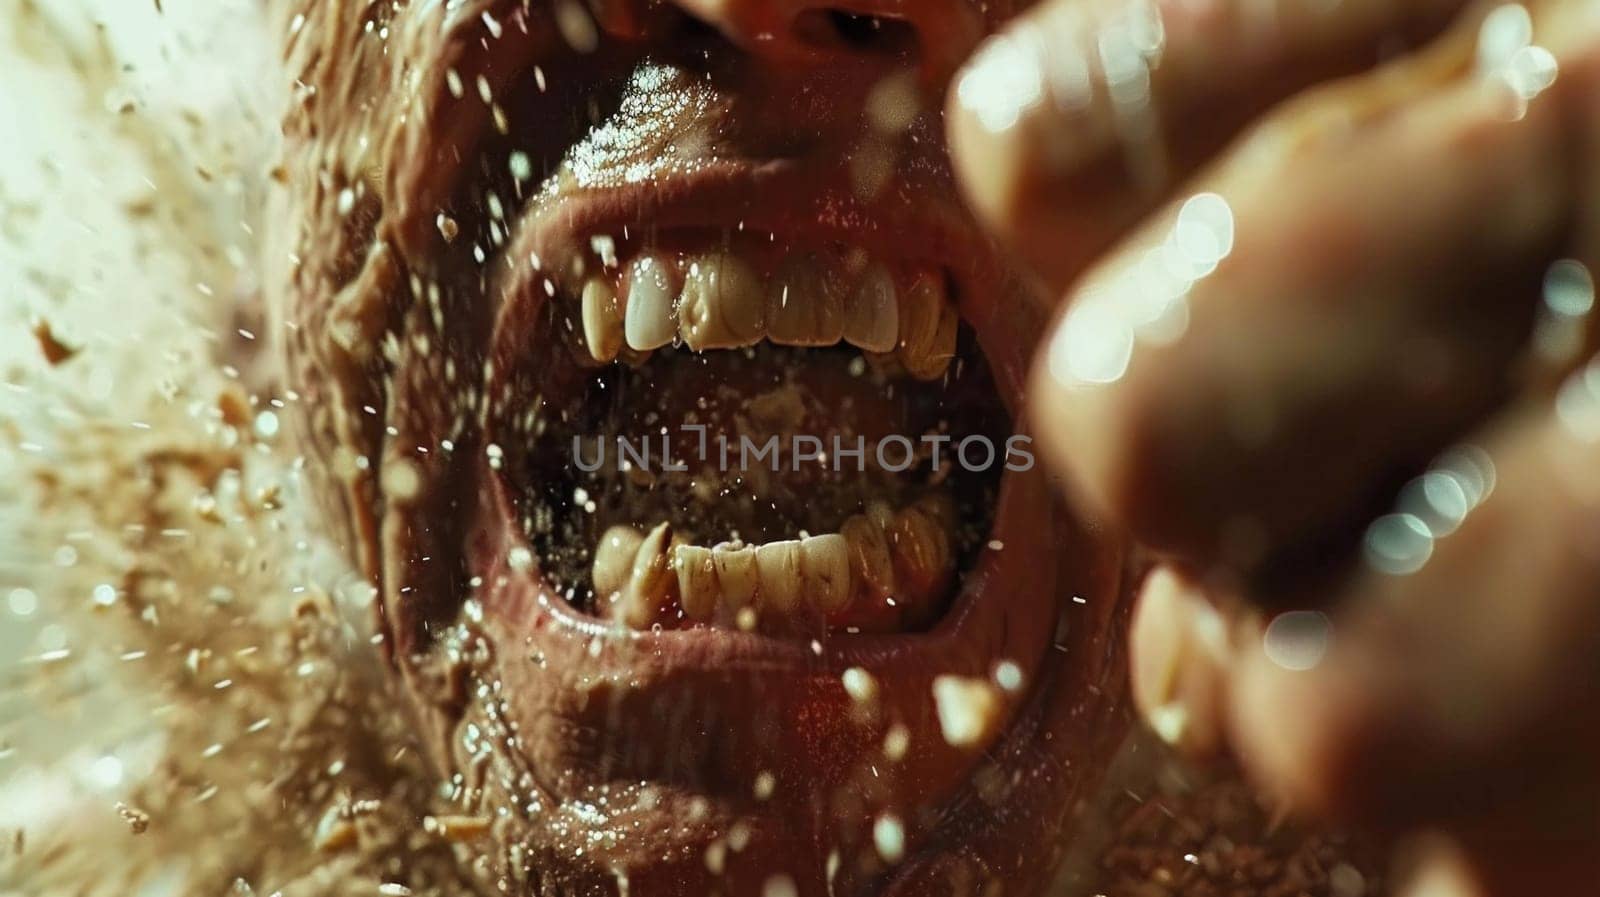 Close-Up of Persons Mouth and Broken Teeth by but_photo